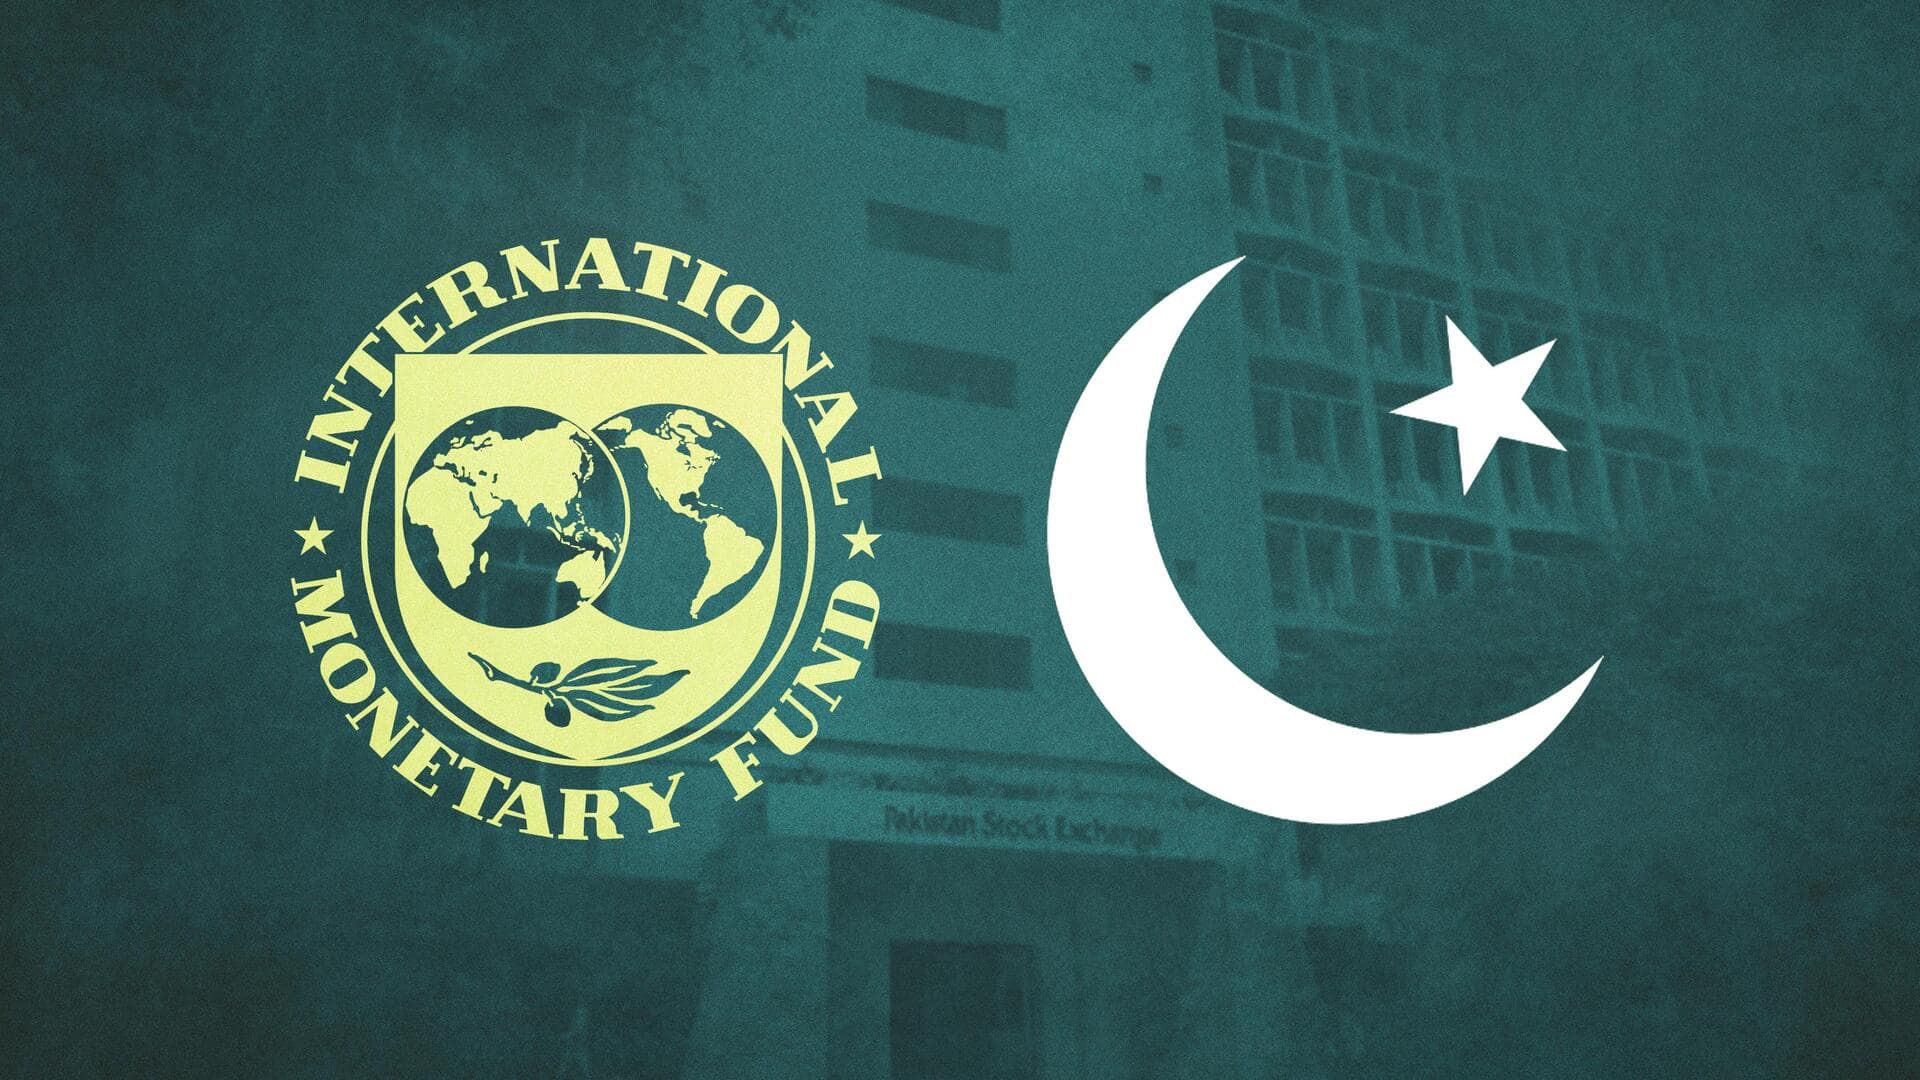 Cash-strapped Pakistan strikes $3 billion standby bailout deal with IMF